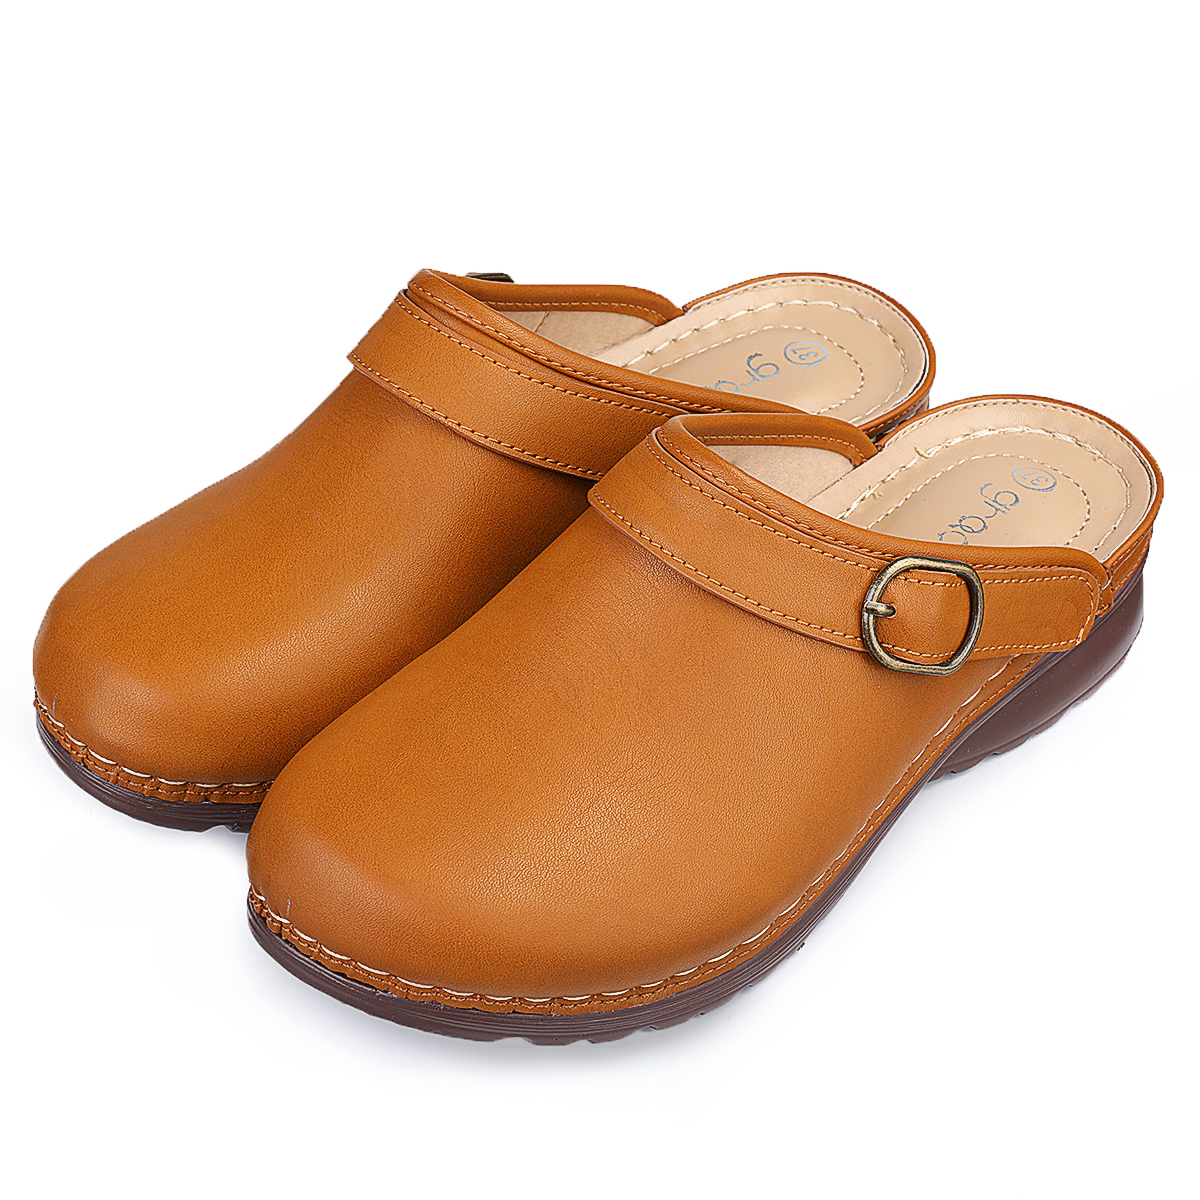 Gracosy Mule Clogs Shoes For Women Summer Leather Slip On Sandals Loafers Vintag 